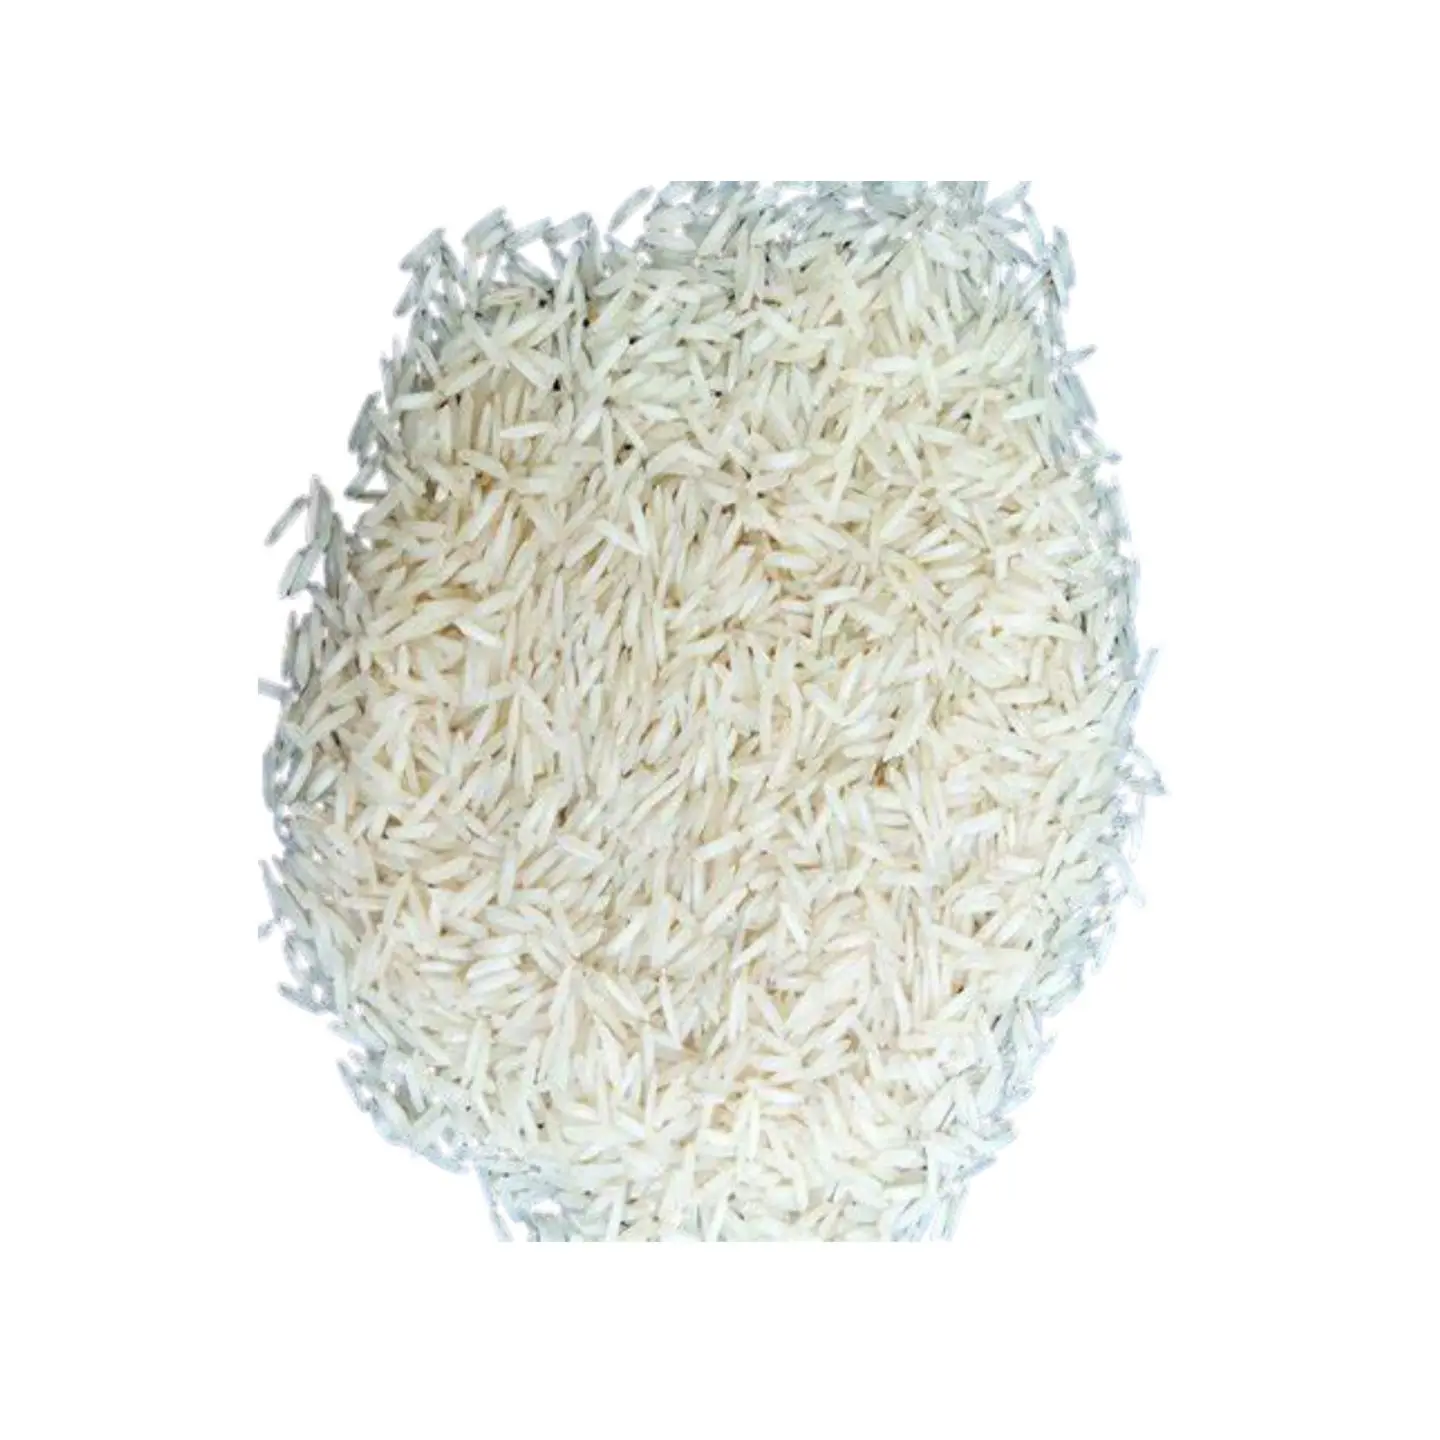 Rich Aroma Long Grain Parboiled Rice Best Tasting Rice for Sale